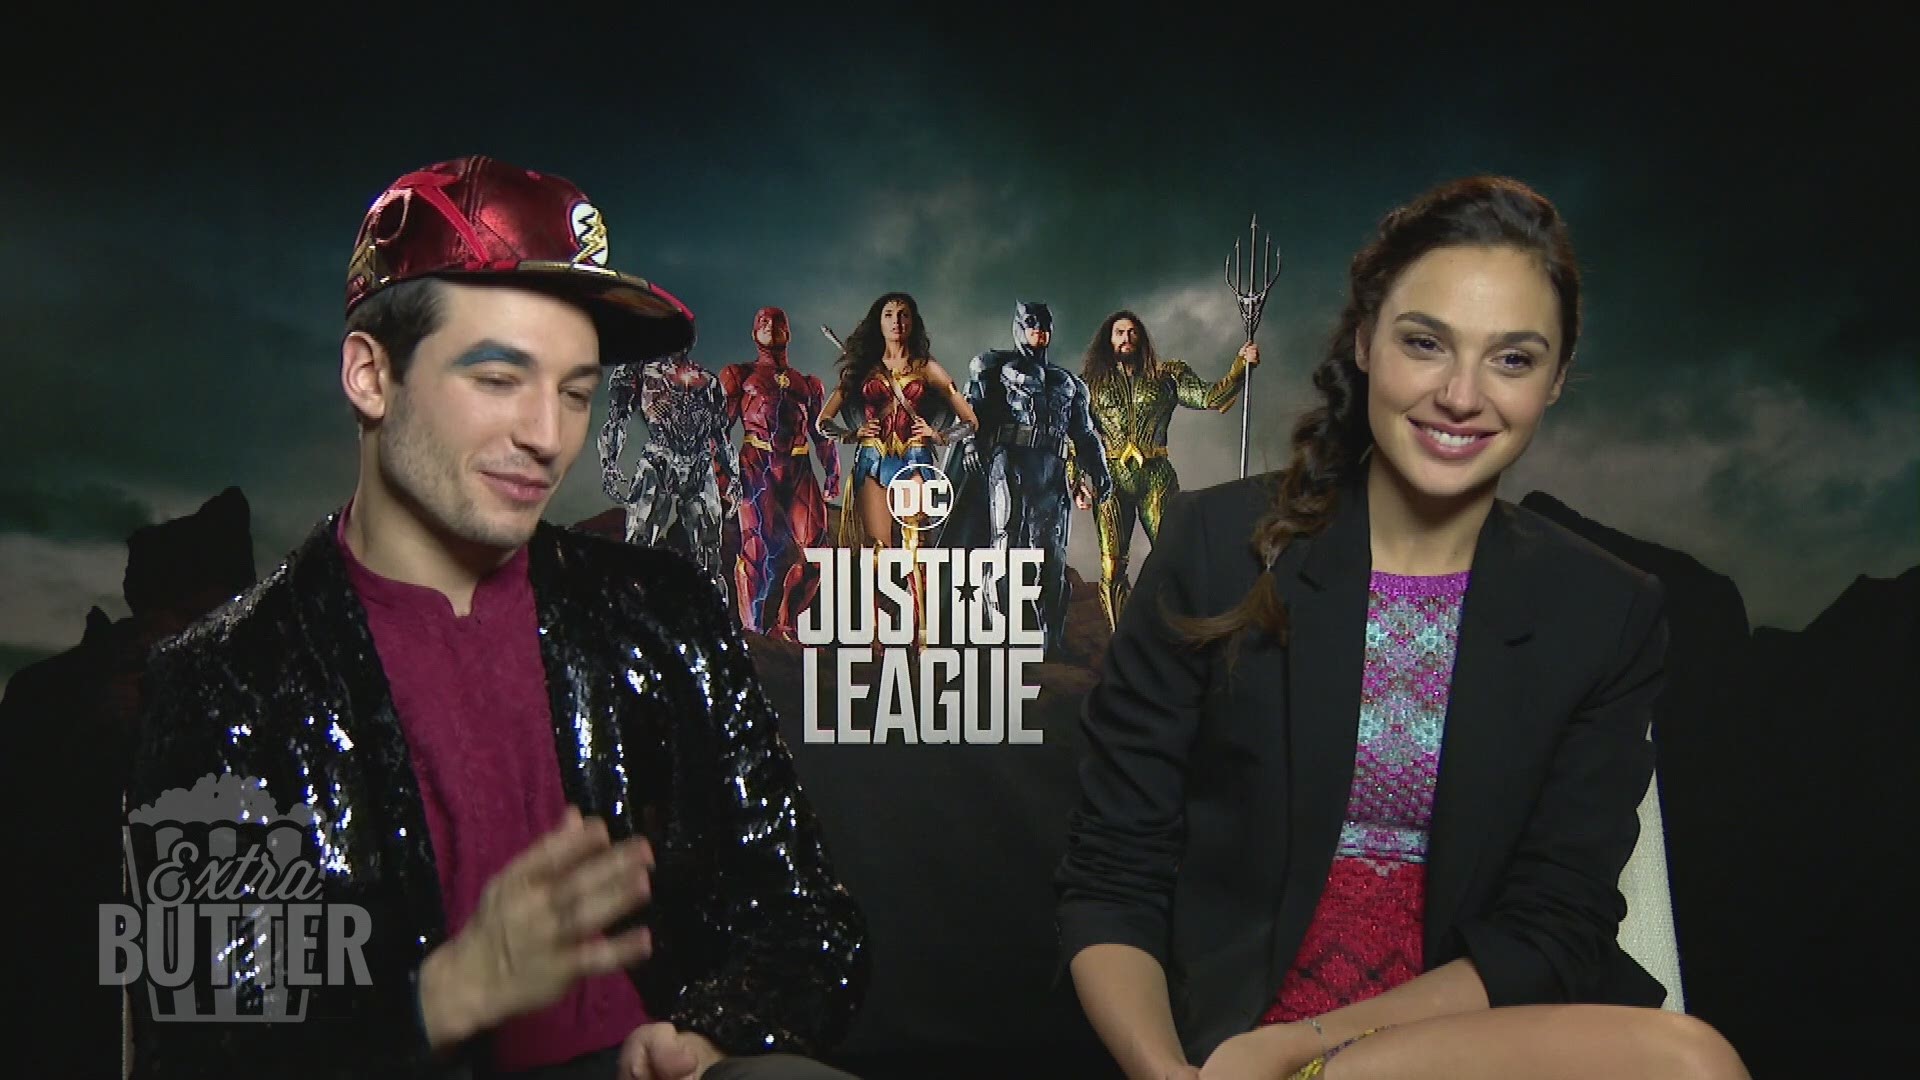 Mark sat down with Ezra Miller and Gal Gadot to talk about their characters in Justice League. (Travel and accommodation costs paid by Warner Bros. Pictures)